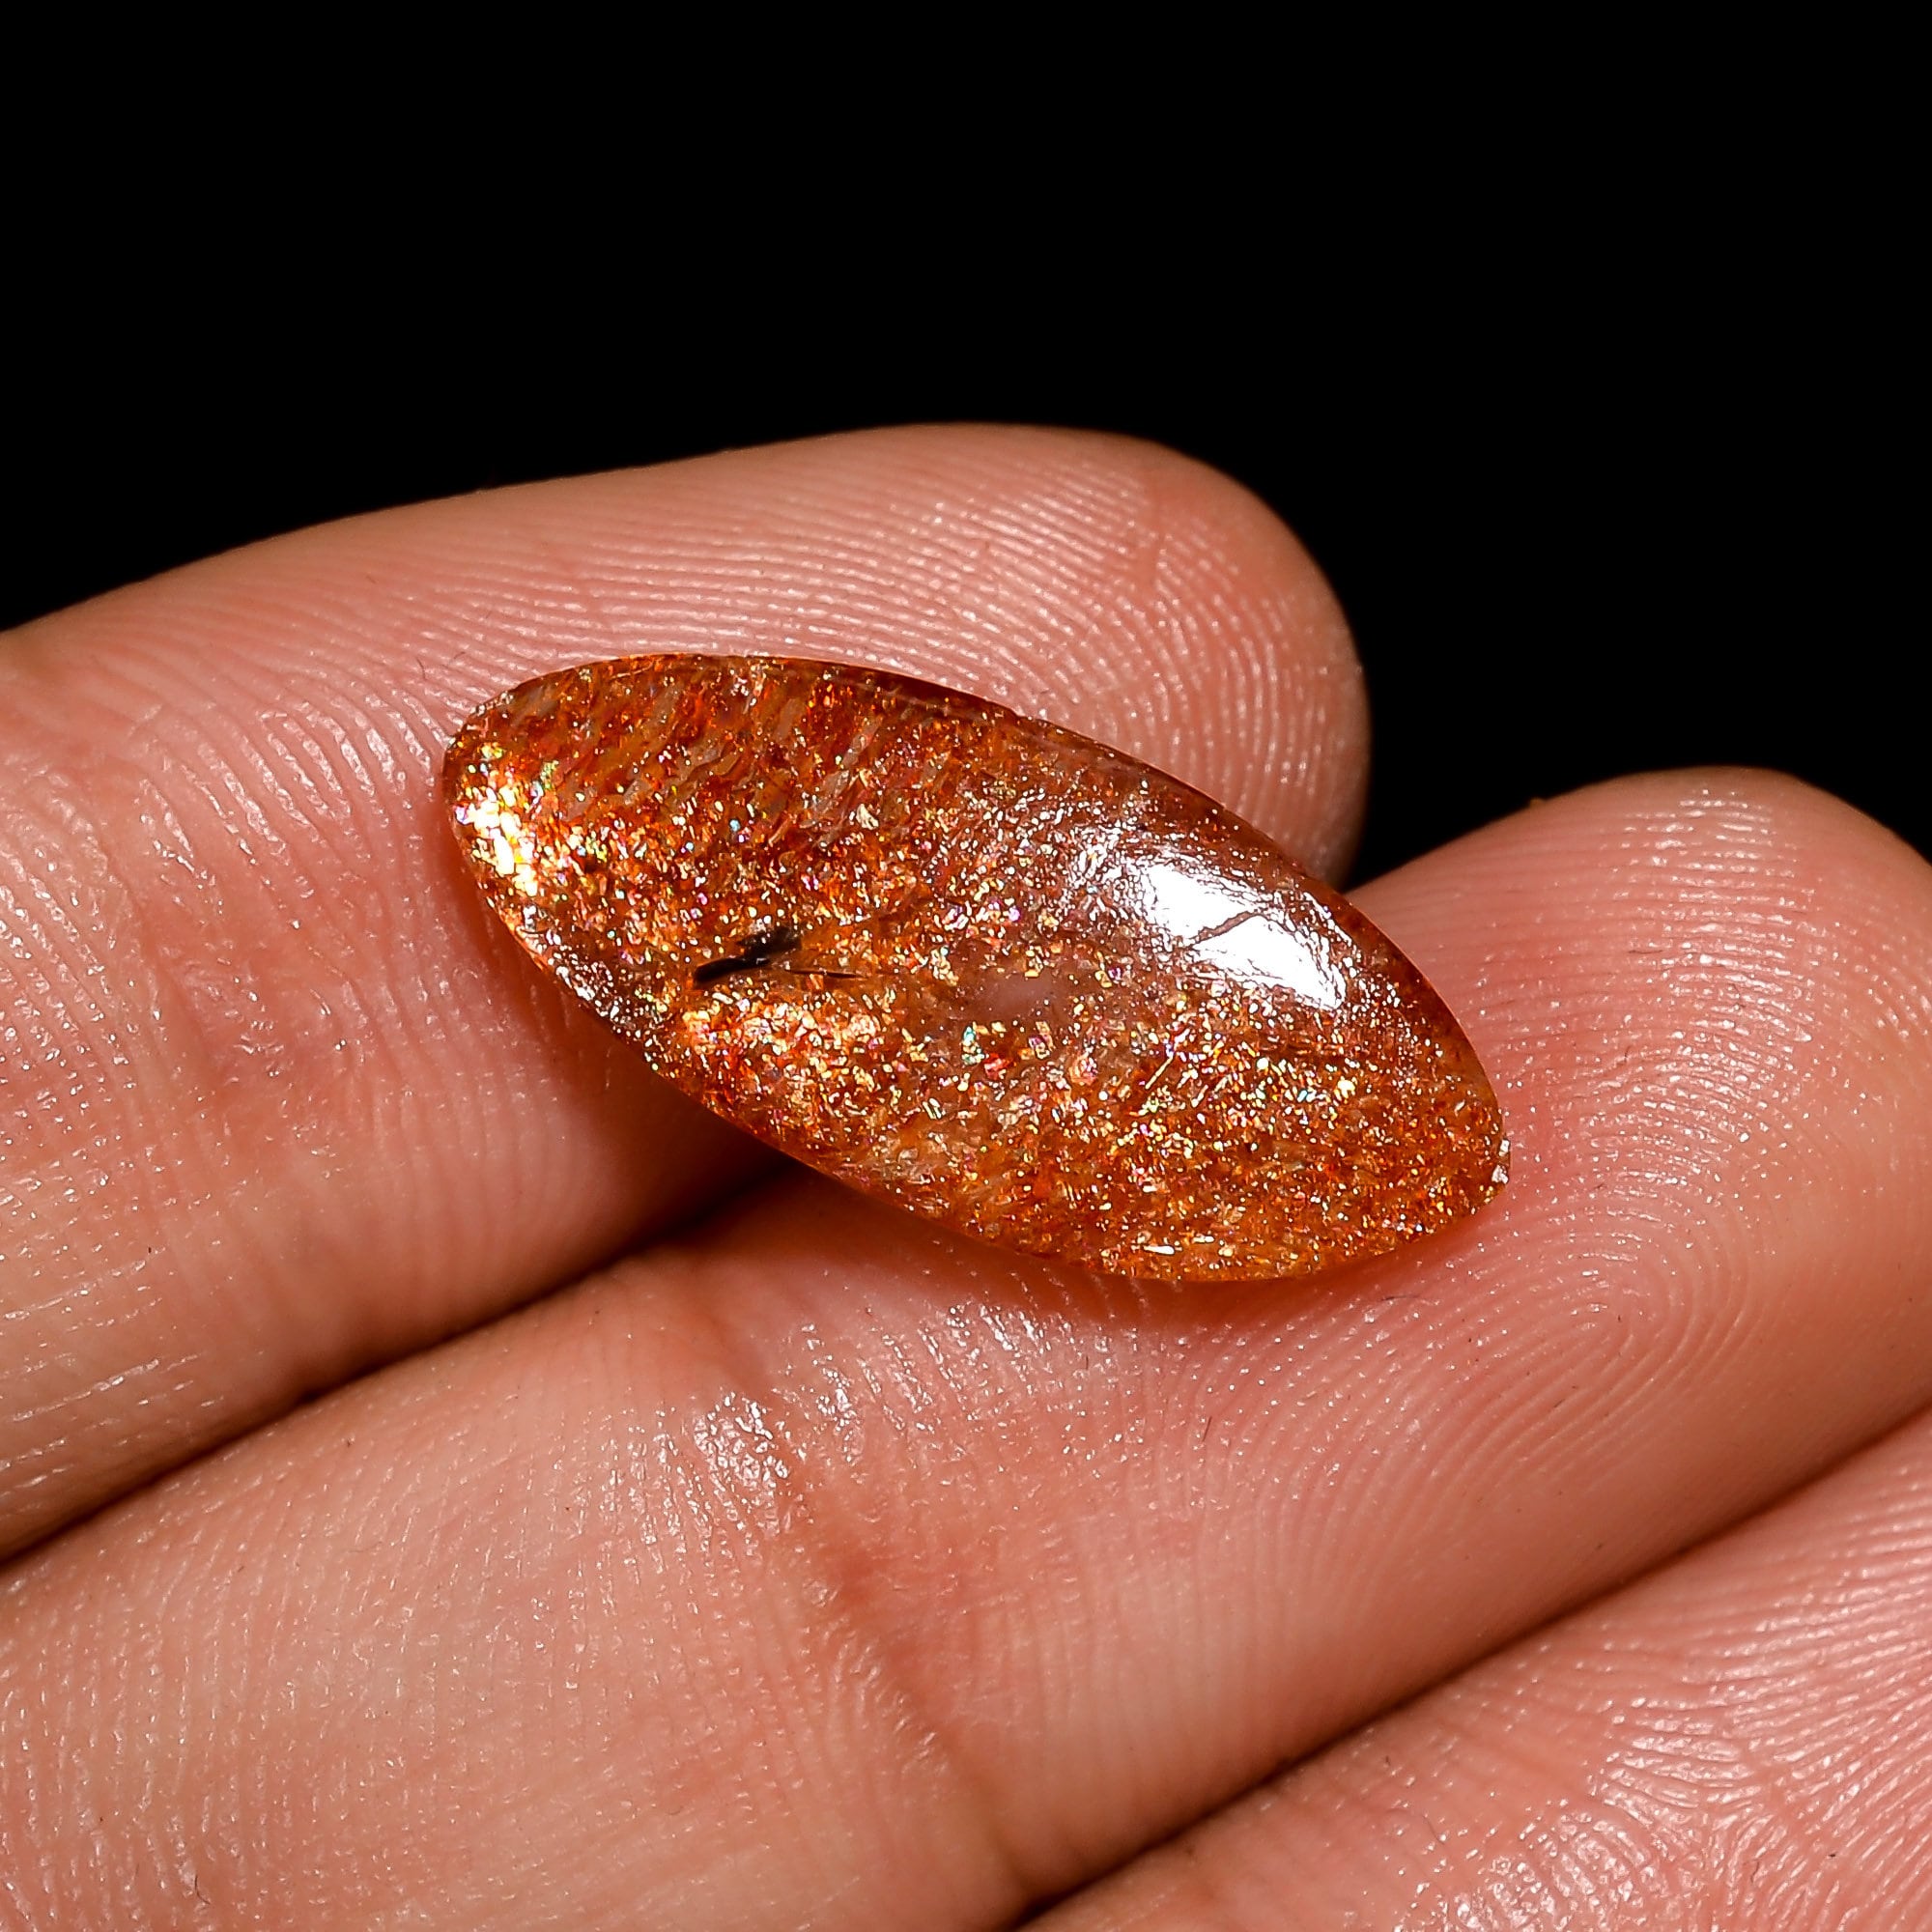 Attractive Top Grade Quality 100% Natural Sunstone Marquise Shape Cabochon Loose Gemstone For Making Jewelry 76.5 Ct 43X24X9 mm SZ-3486